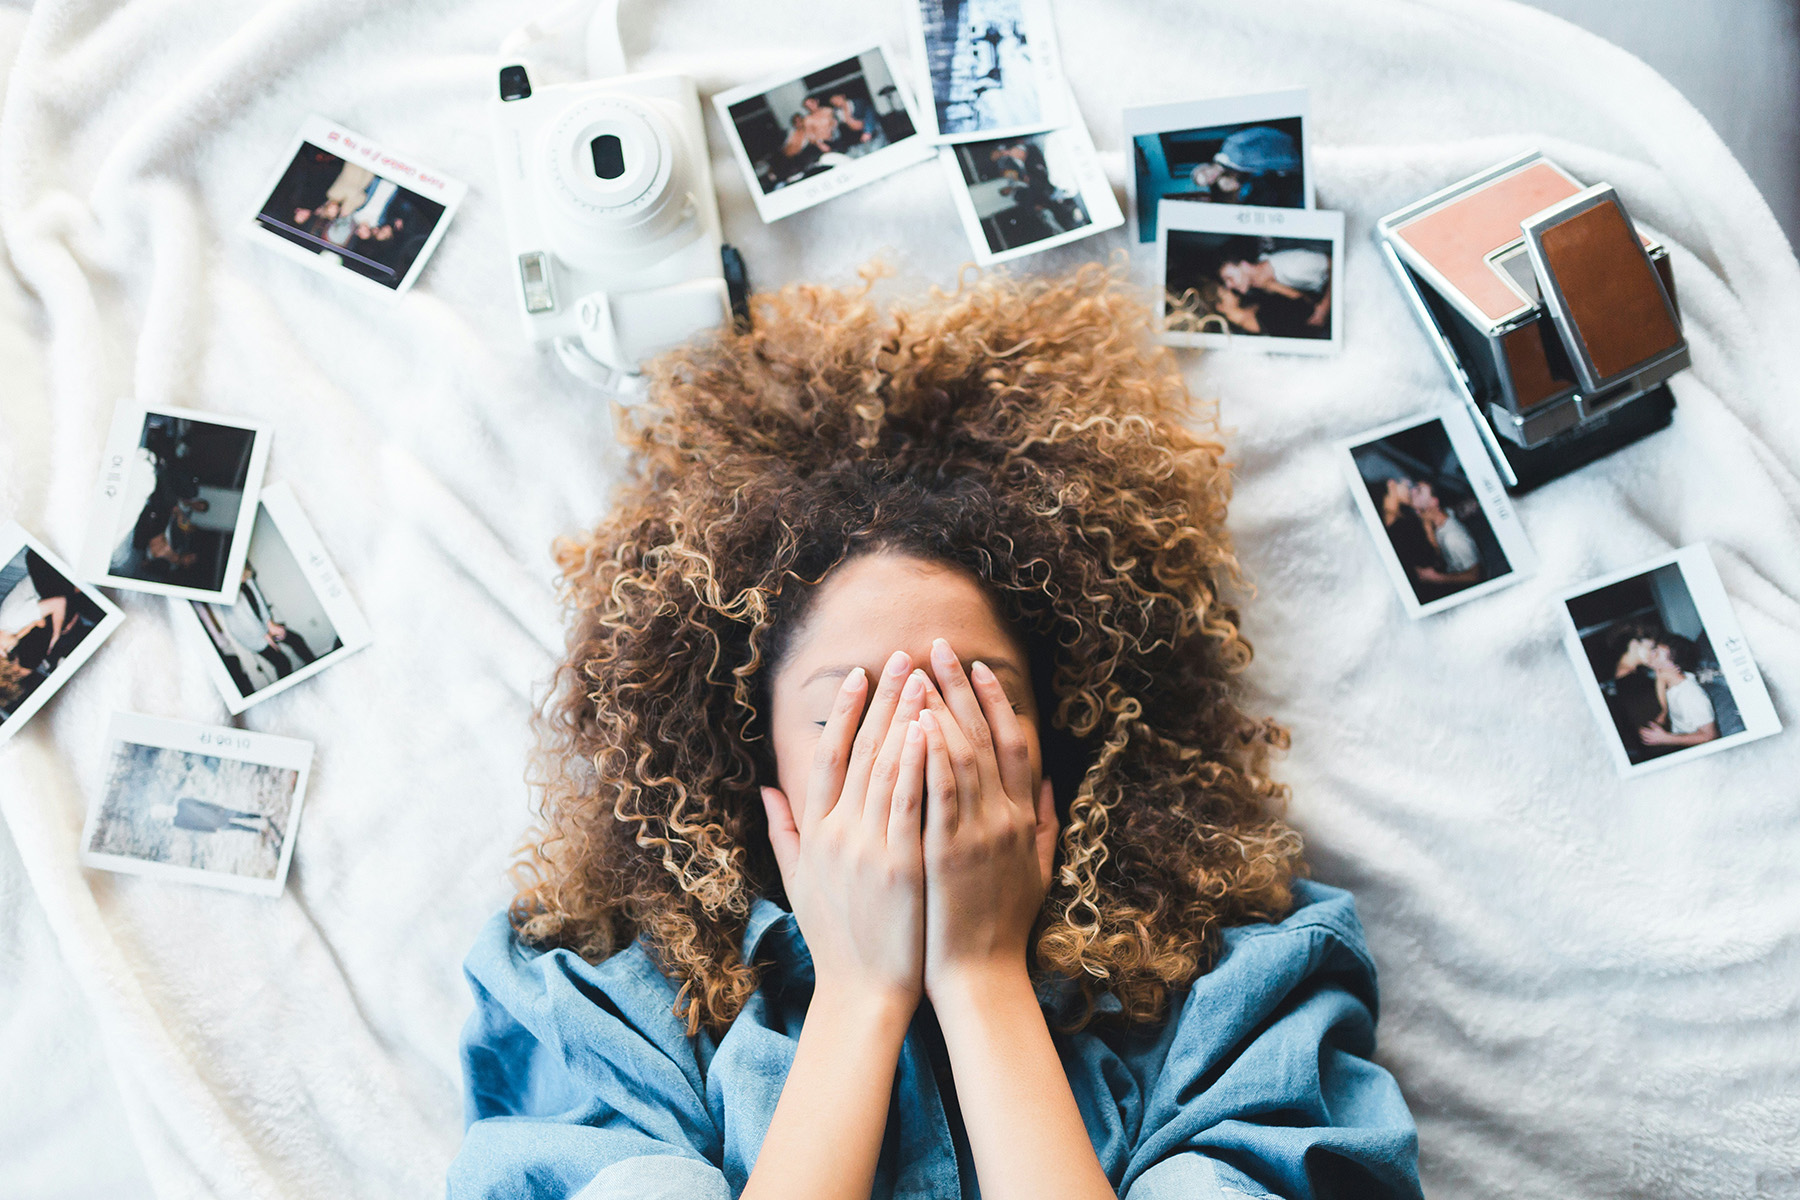 Girl lies on bed, coves her face with hands, photos scattered around